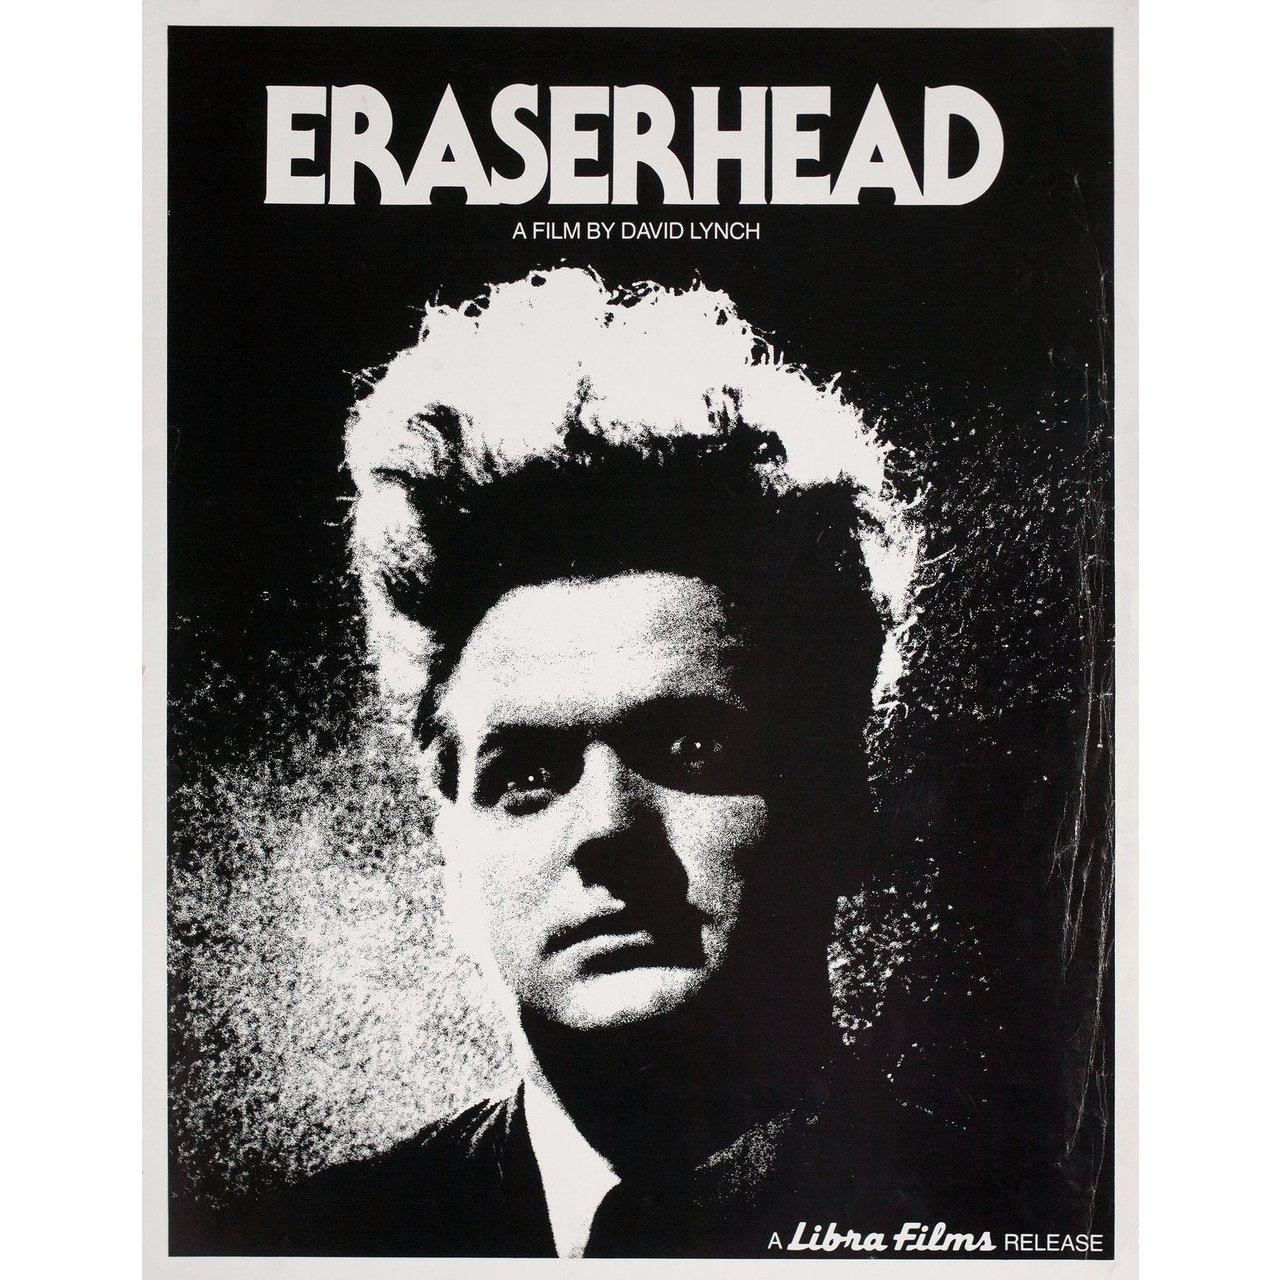 Original 1980s re-release U.S. mini poster for the 1977 film ‘Eraserhead’ directed by David Lynch with Jack Nance / Charlotte Stewart / Allen Joseph / Jeanne Bates. Very good-fine condition, rolled. Please note: the size is stated in inches and the